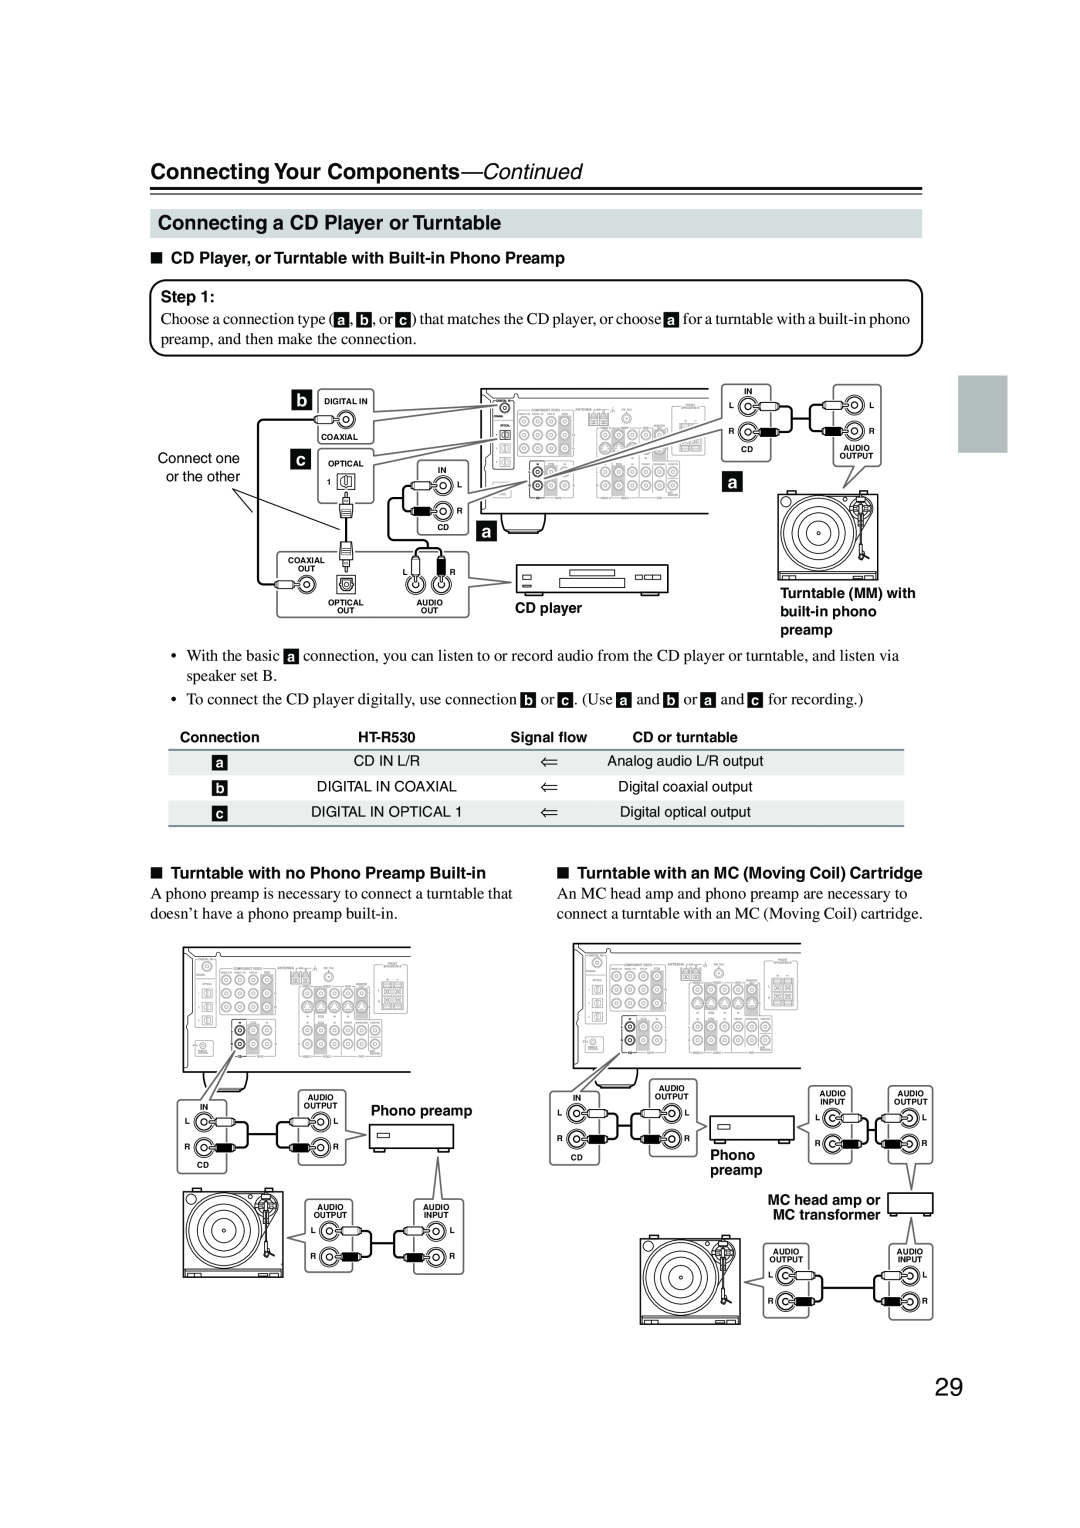 Onkyo HT-S780 instruction manual Connecting a CD Player or Turntable, Connecting Your Components-Continued, Step 